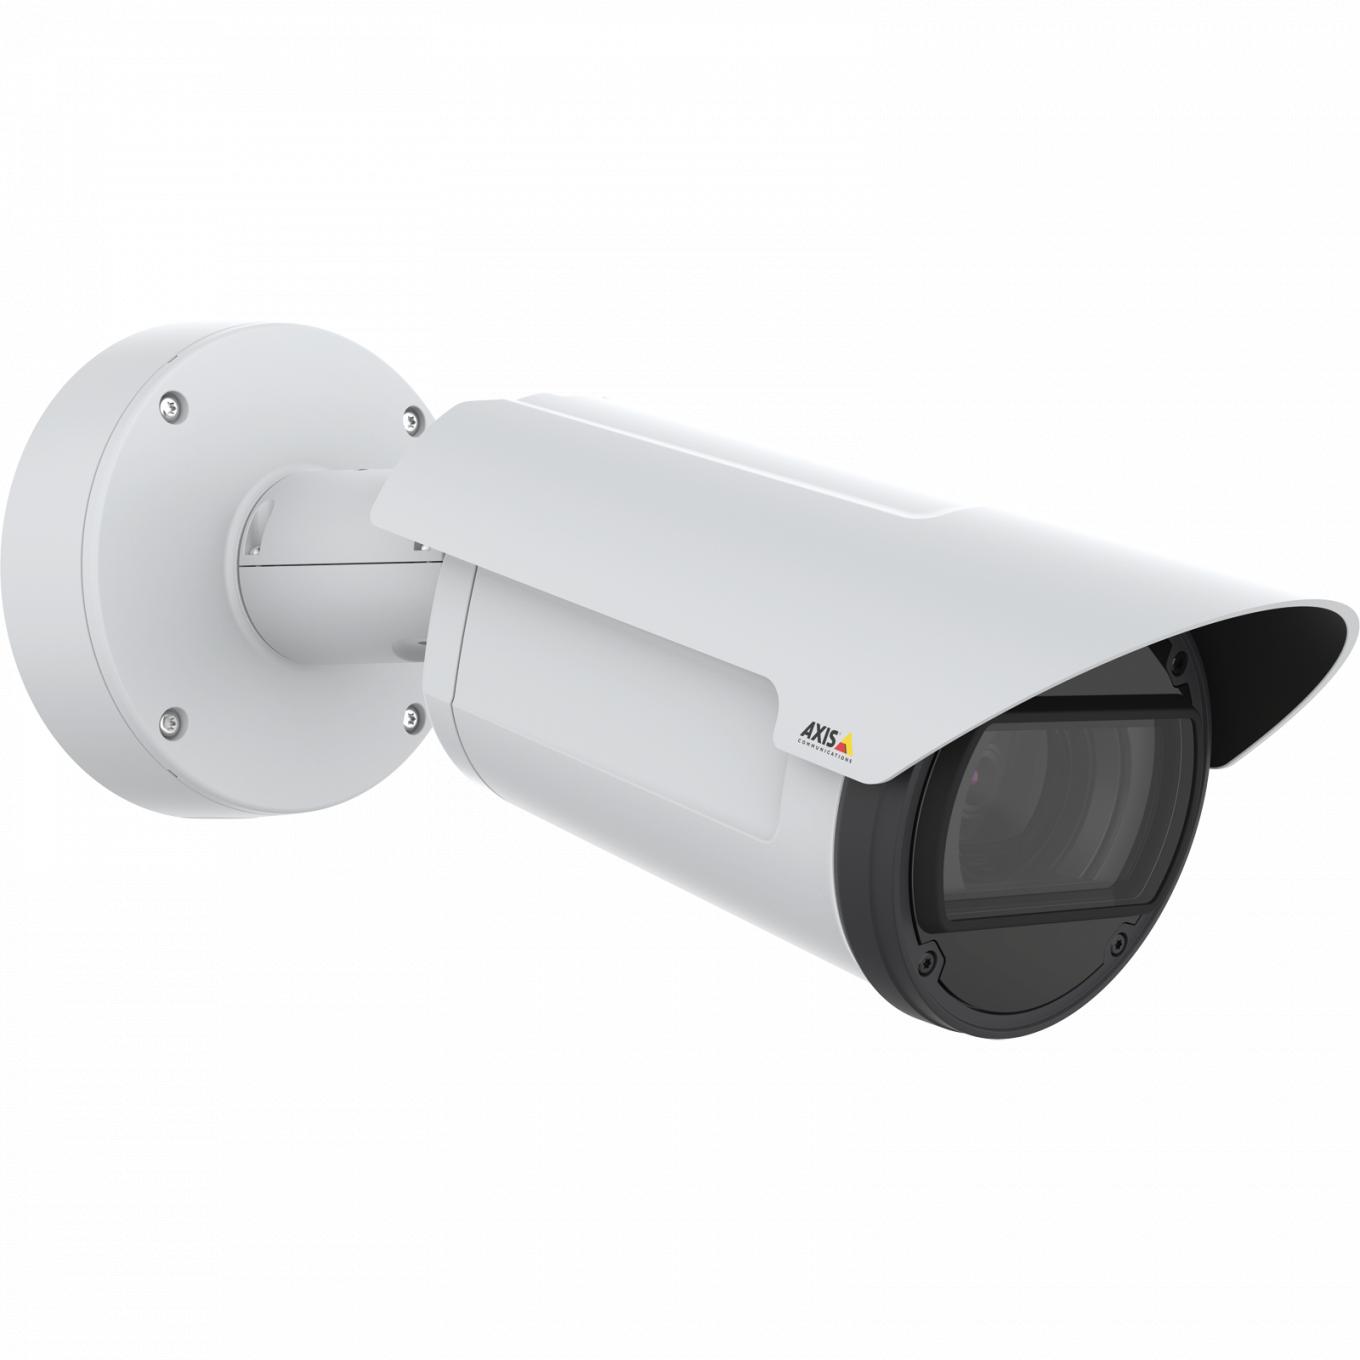 AXIS Q1786-LE Network Camera | Axis Communications